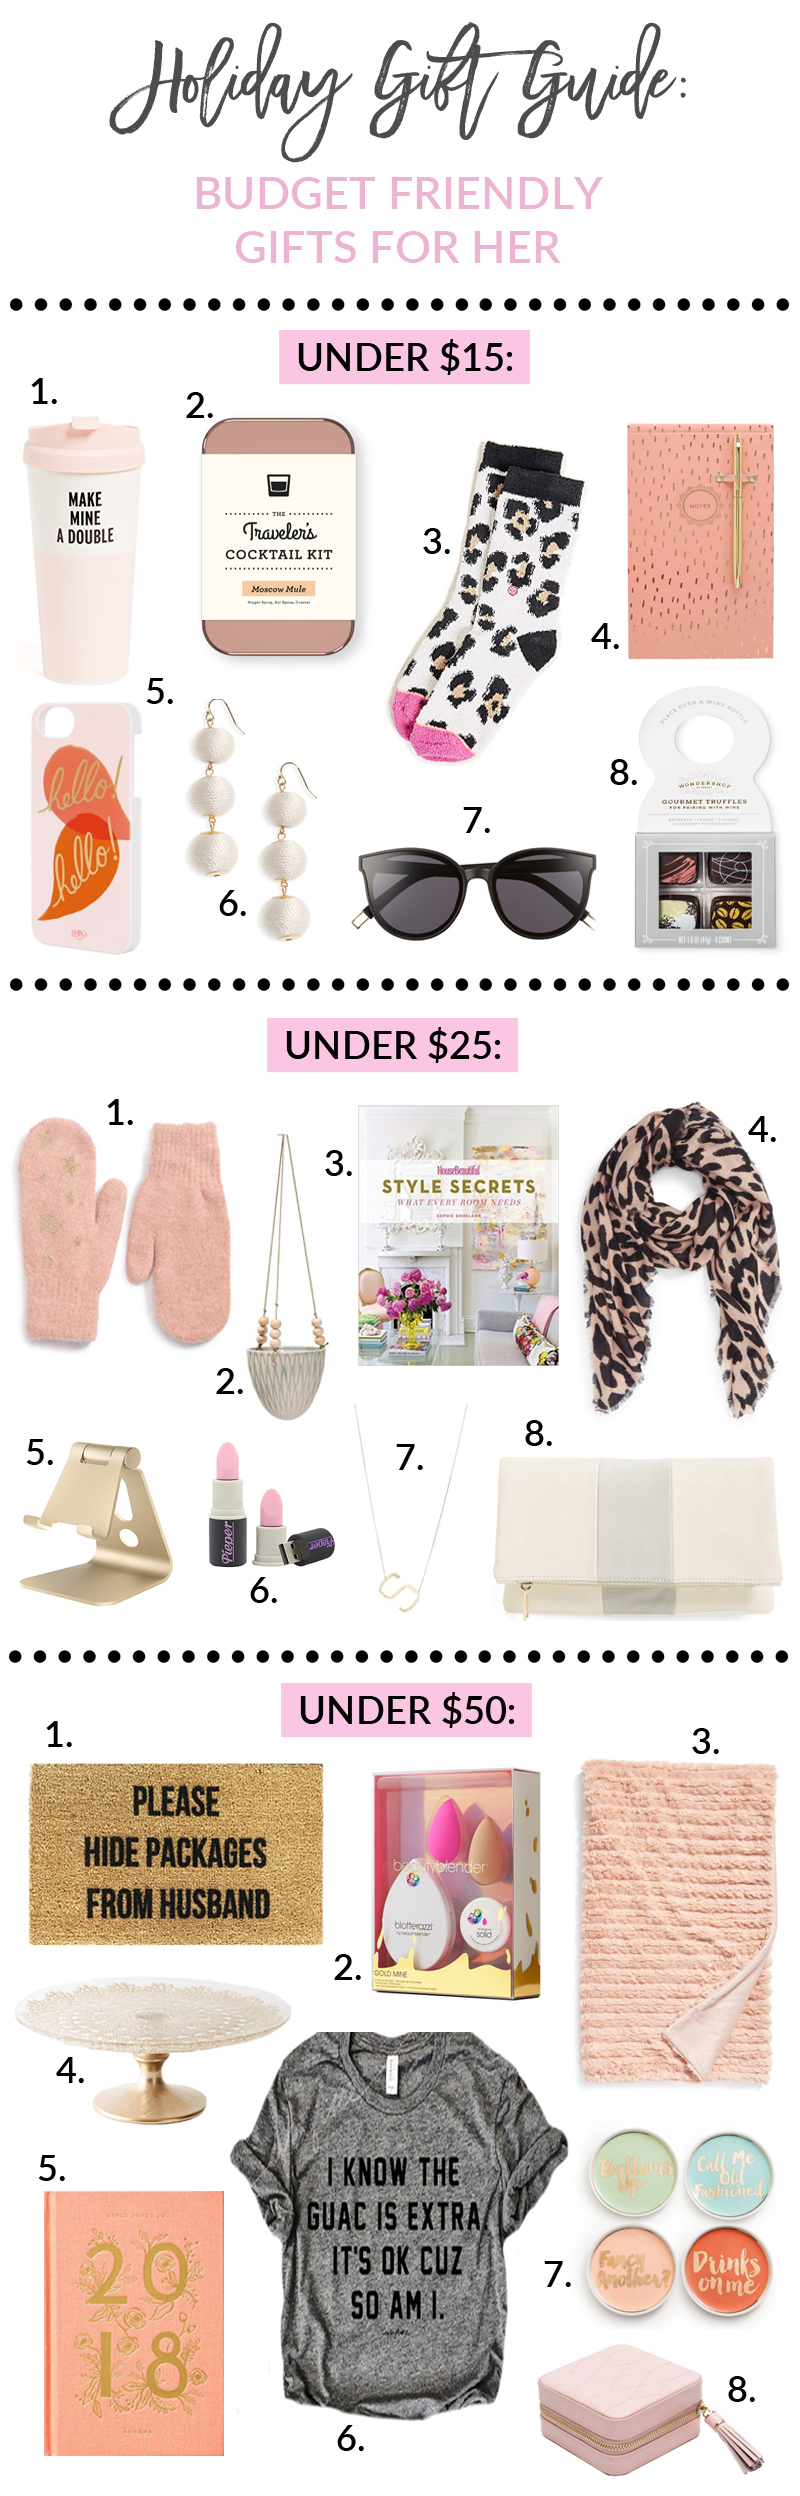 180+ Budget-Friendly Gift Ideas for Women